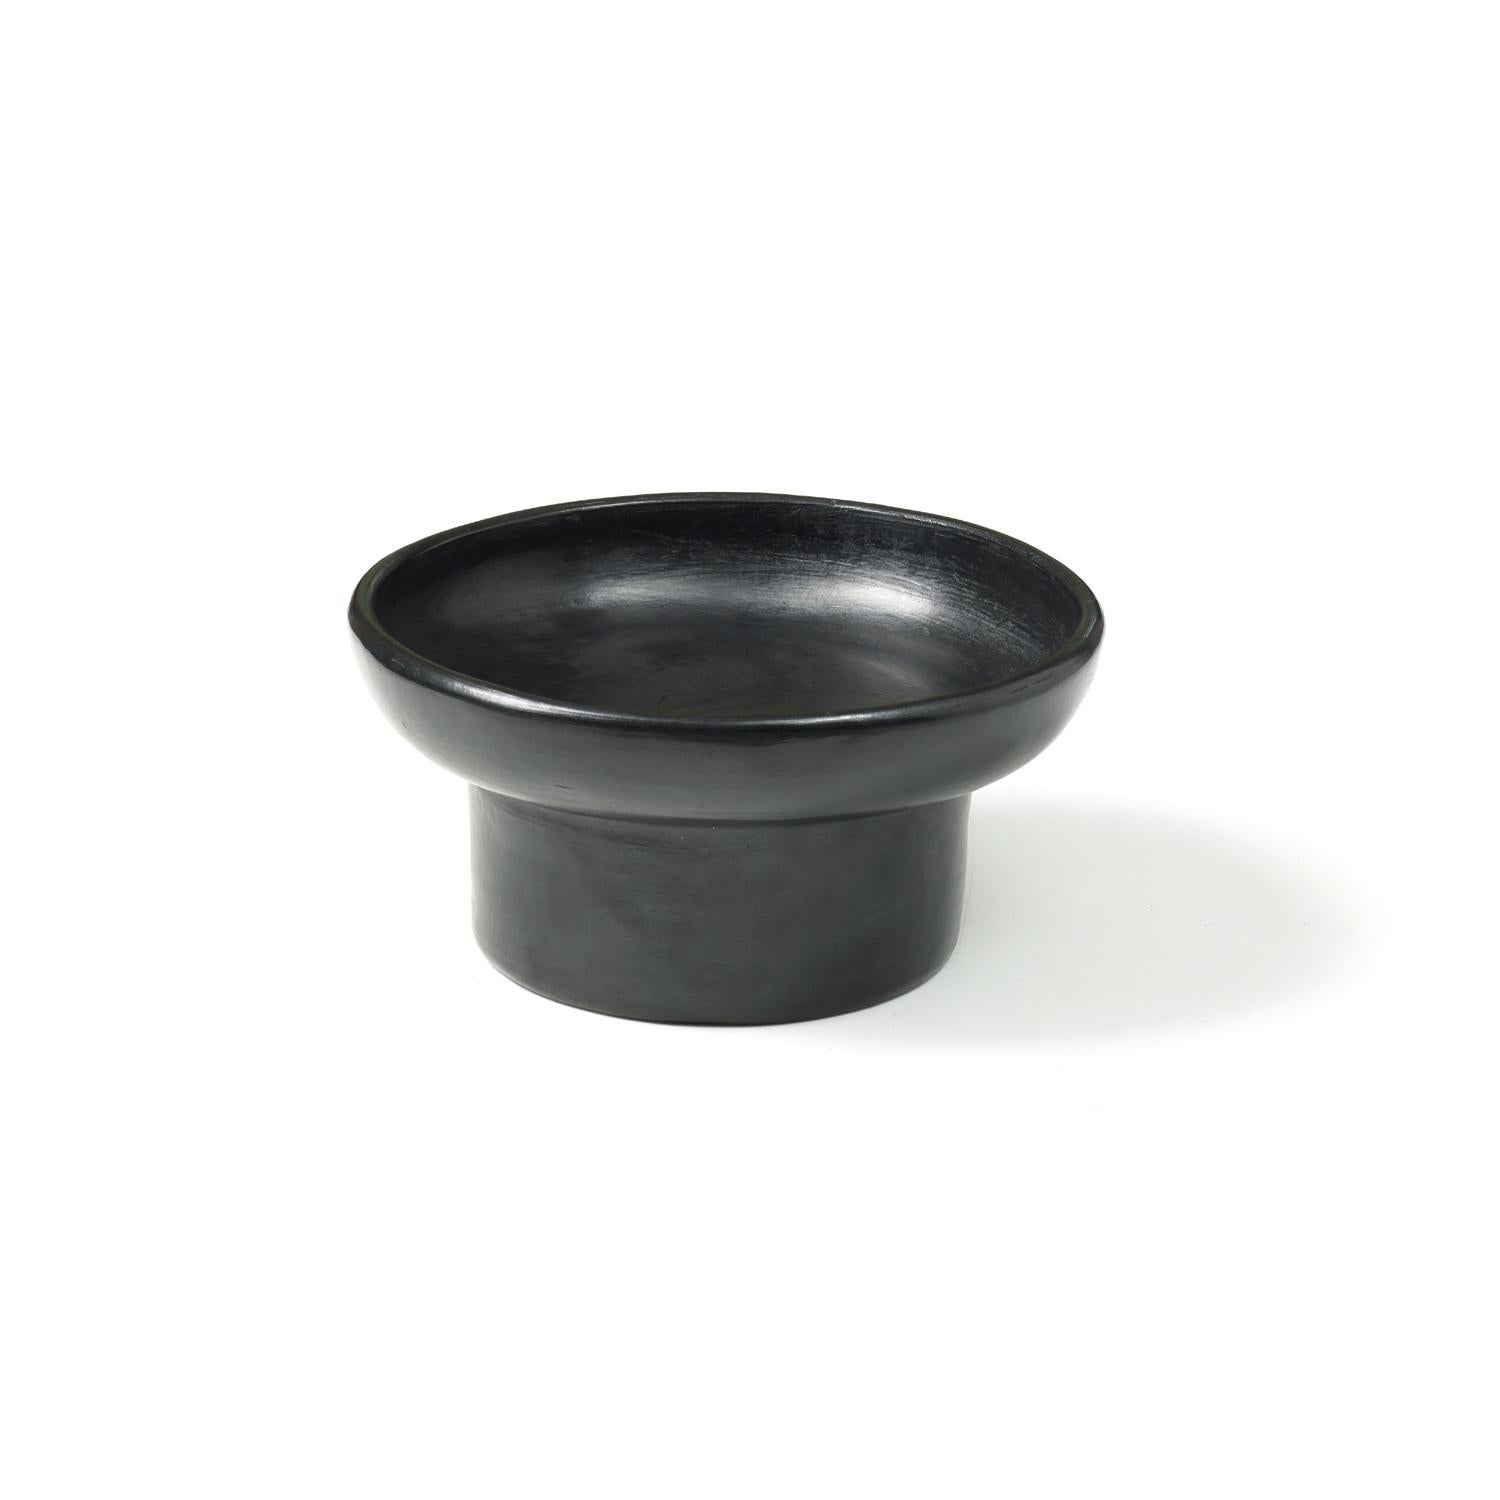 Mini tray 2 by Sebastian Herkner
Materials: Heat-resistant black ceramic. 
Technique: Glazed. Oven cooked and polished with semi-precious stones. 
Dimensions: Diameter 25 cm x height 9 cm 
Available in sizes large and small.

This pot belongs